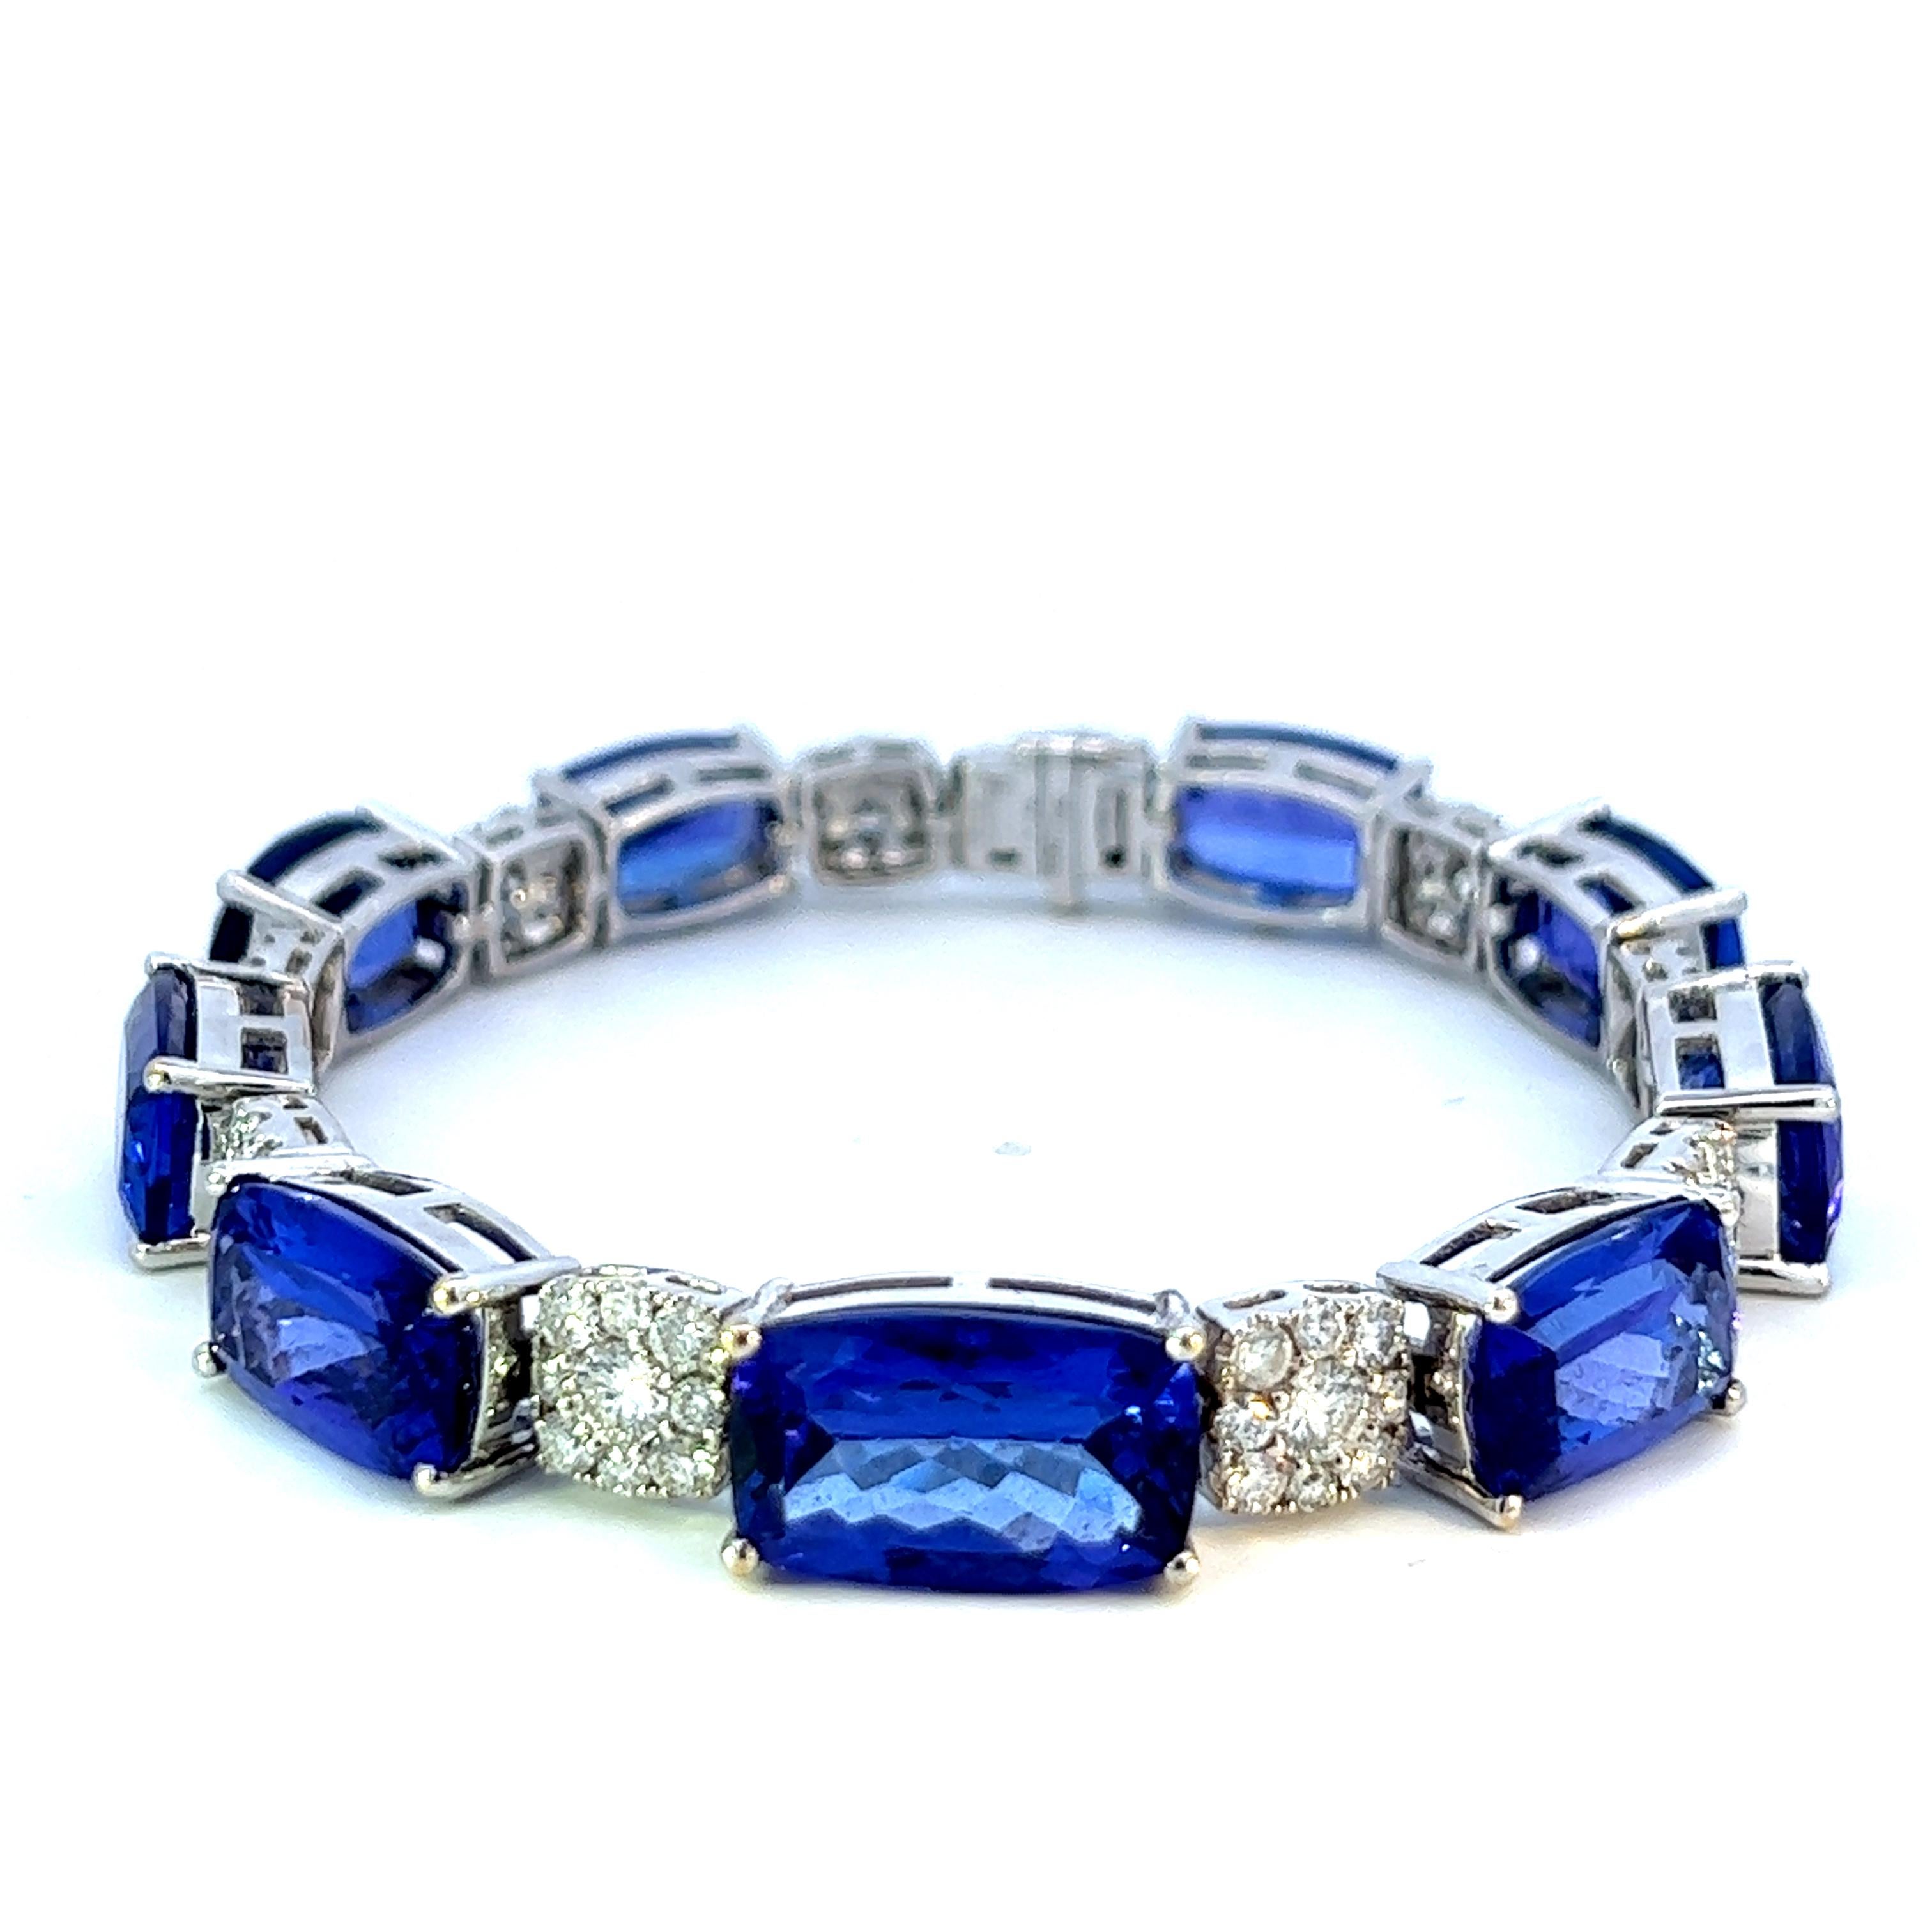 Introducing the  18KW Tanzanite Cushion Bracelet, a brand new masterpiece exuding elegance and luxury. With 45.39 carats of vivid tanzanite and 3.96 carats of sparkling diamonds, this bracelet is a captivating statement piece. Crafted with precision